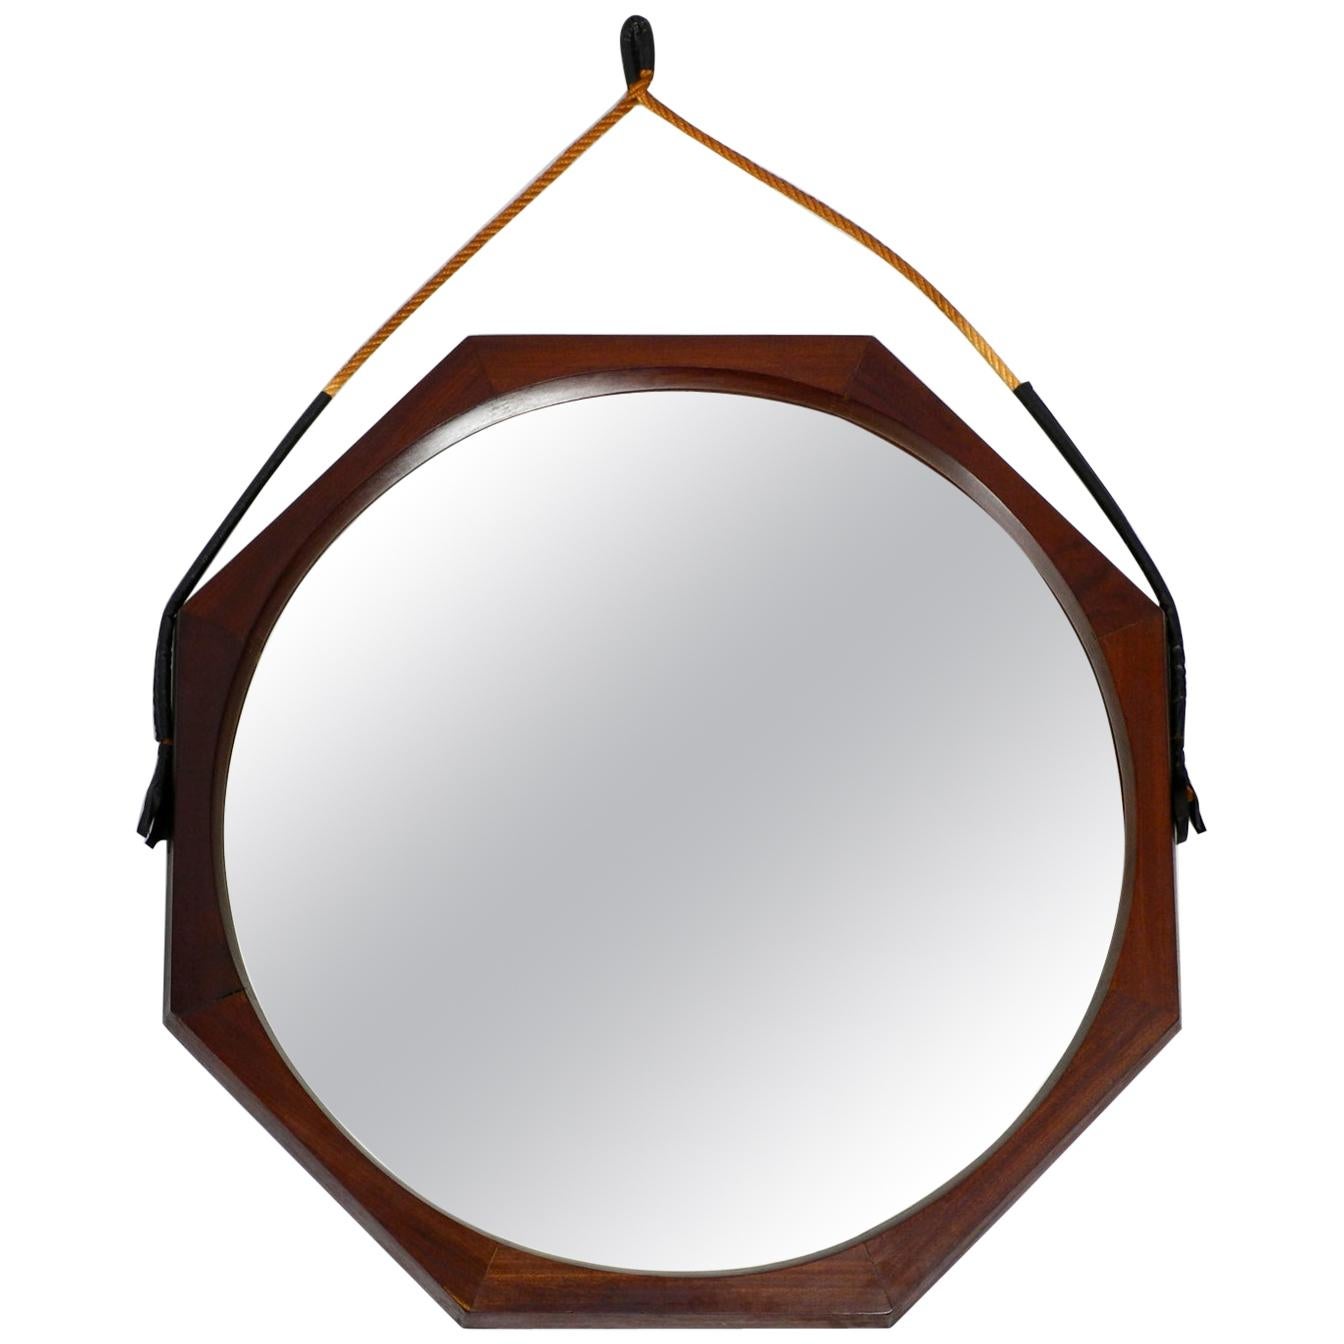 1960s Large Teak Wall Mirror with Thick Rope Made of Natural Fiber